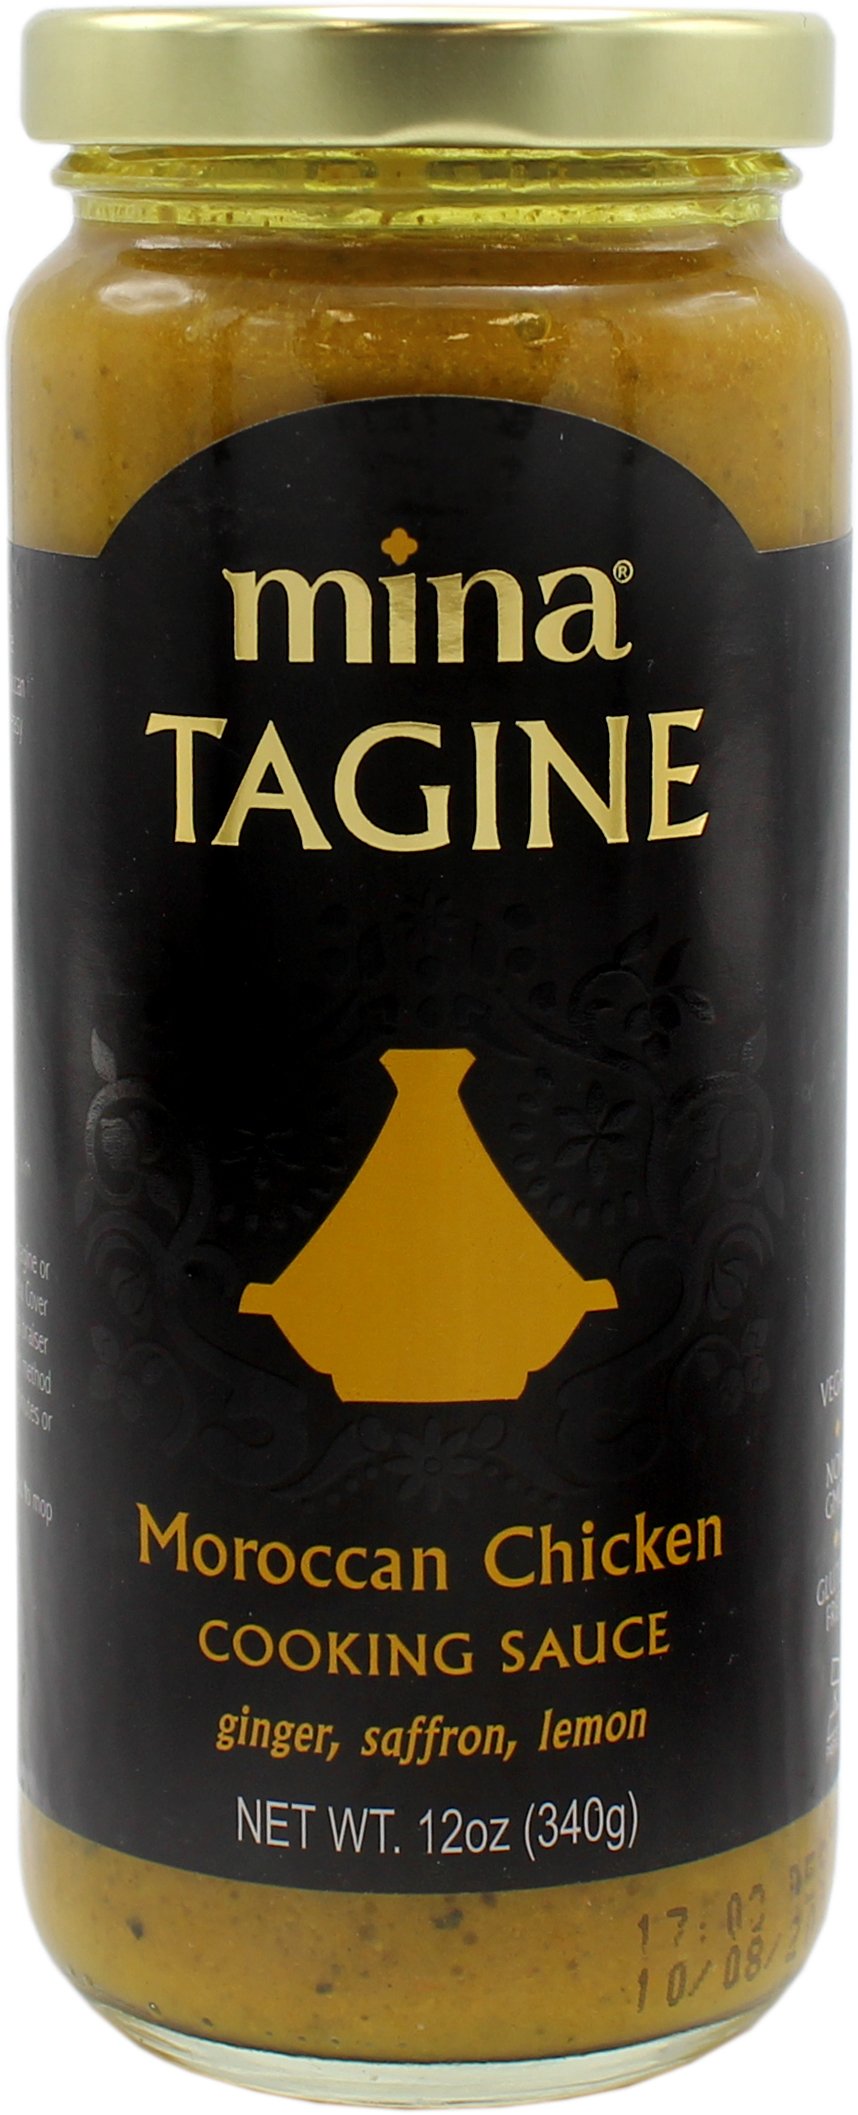 Mina Tagine Moroccan Chicken Cooking Sauce Shop Specialty Sauces At H E B